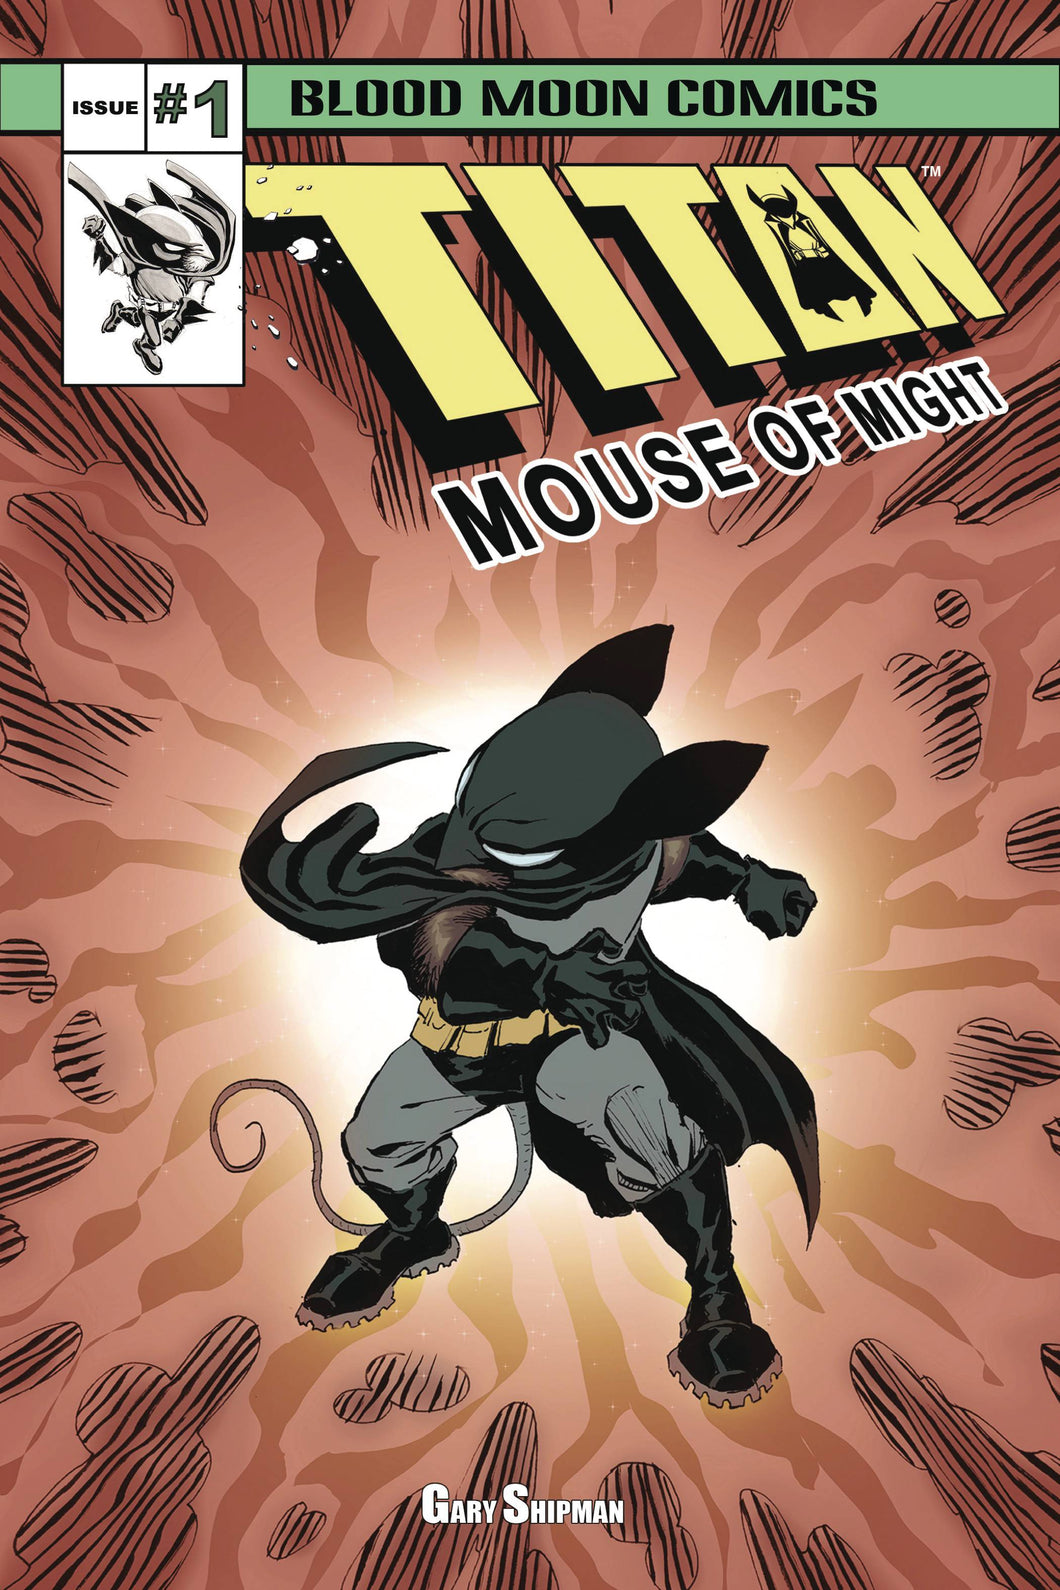 TITAN MOUSE OF MIGHT #1